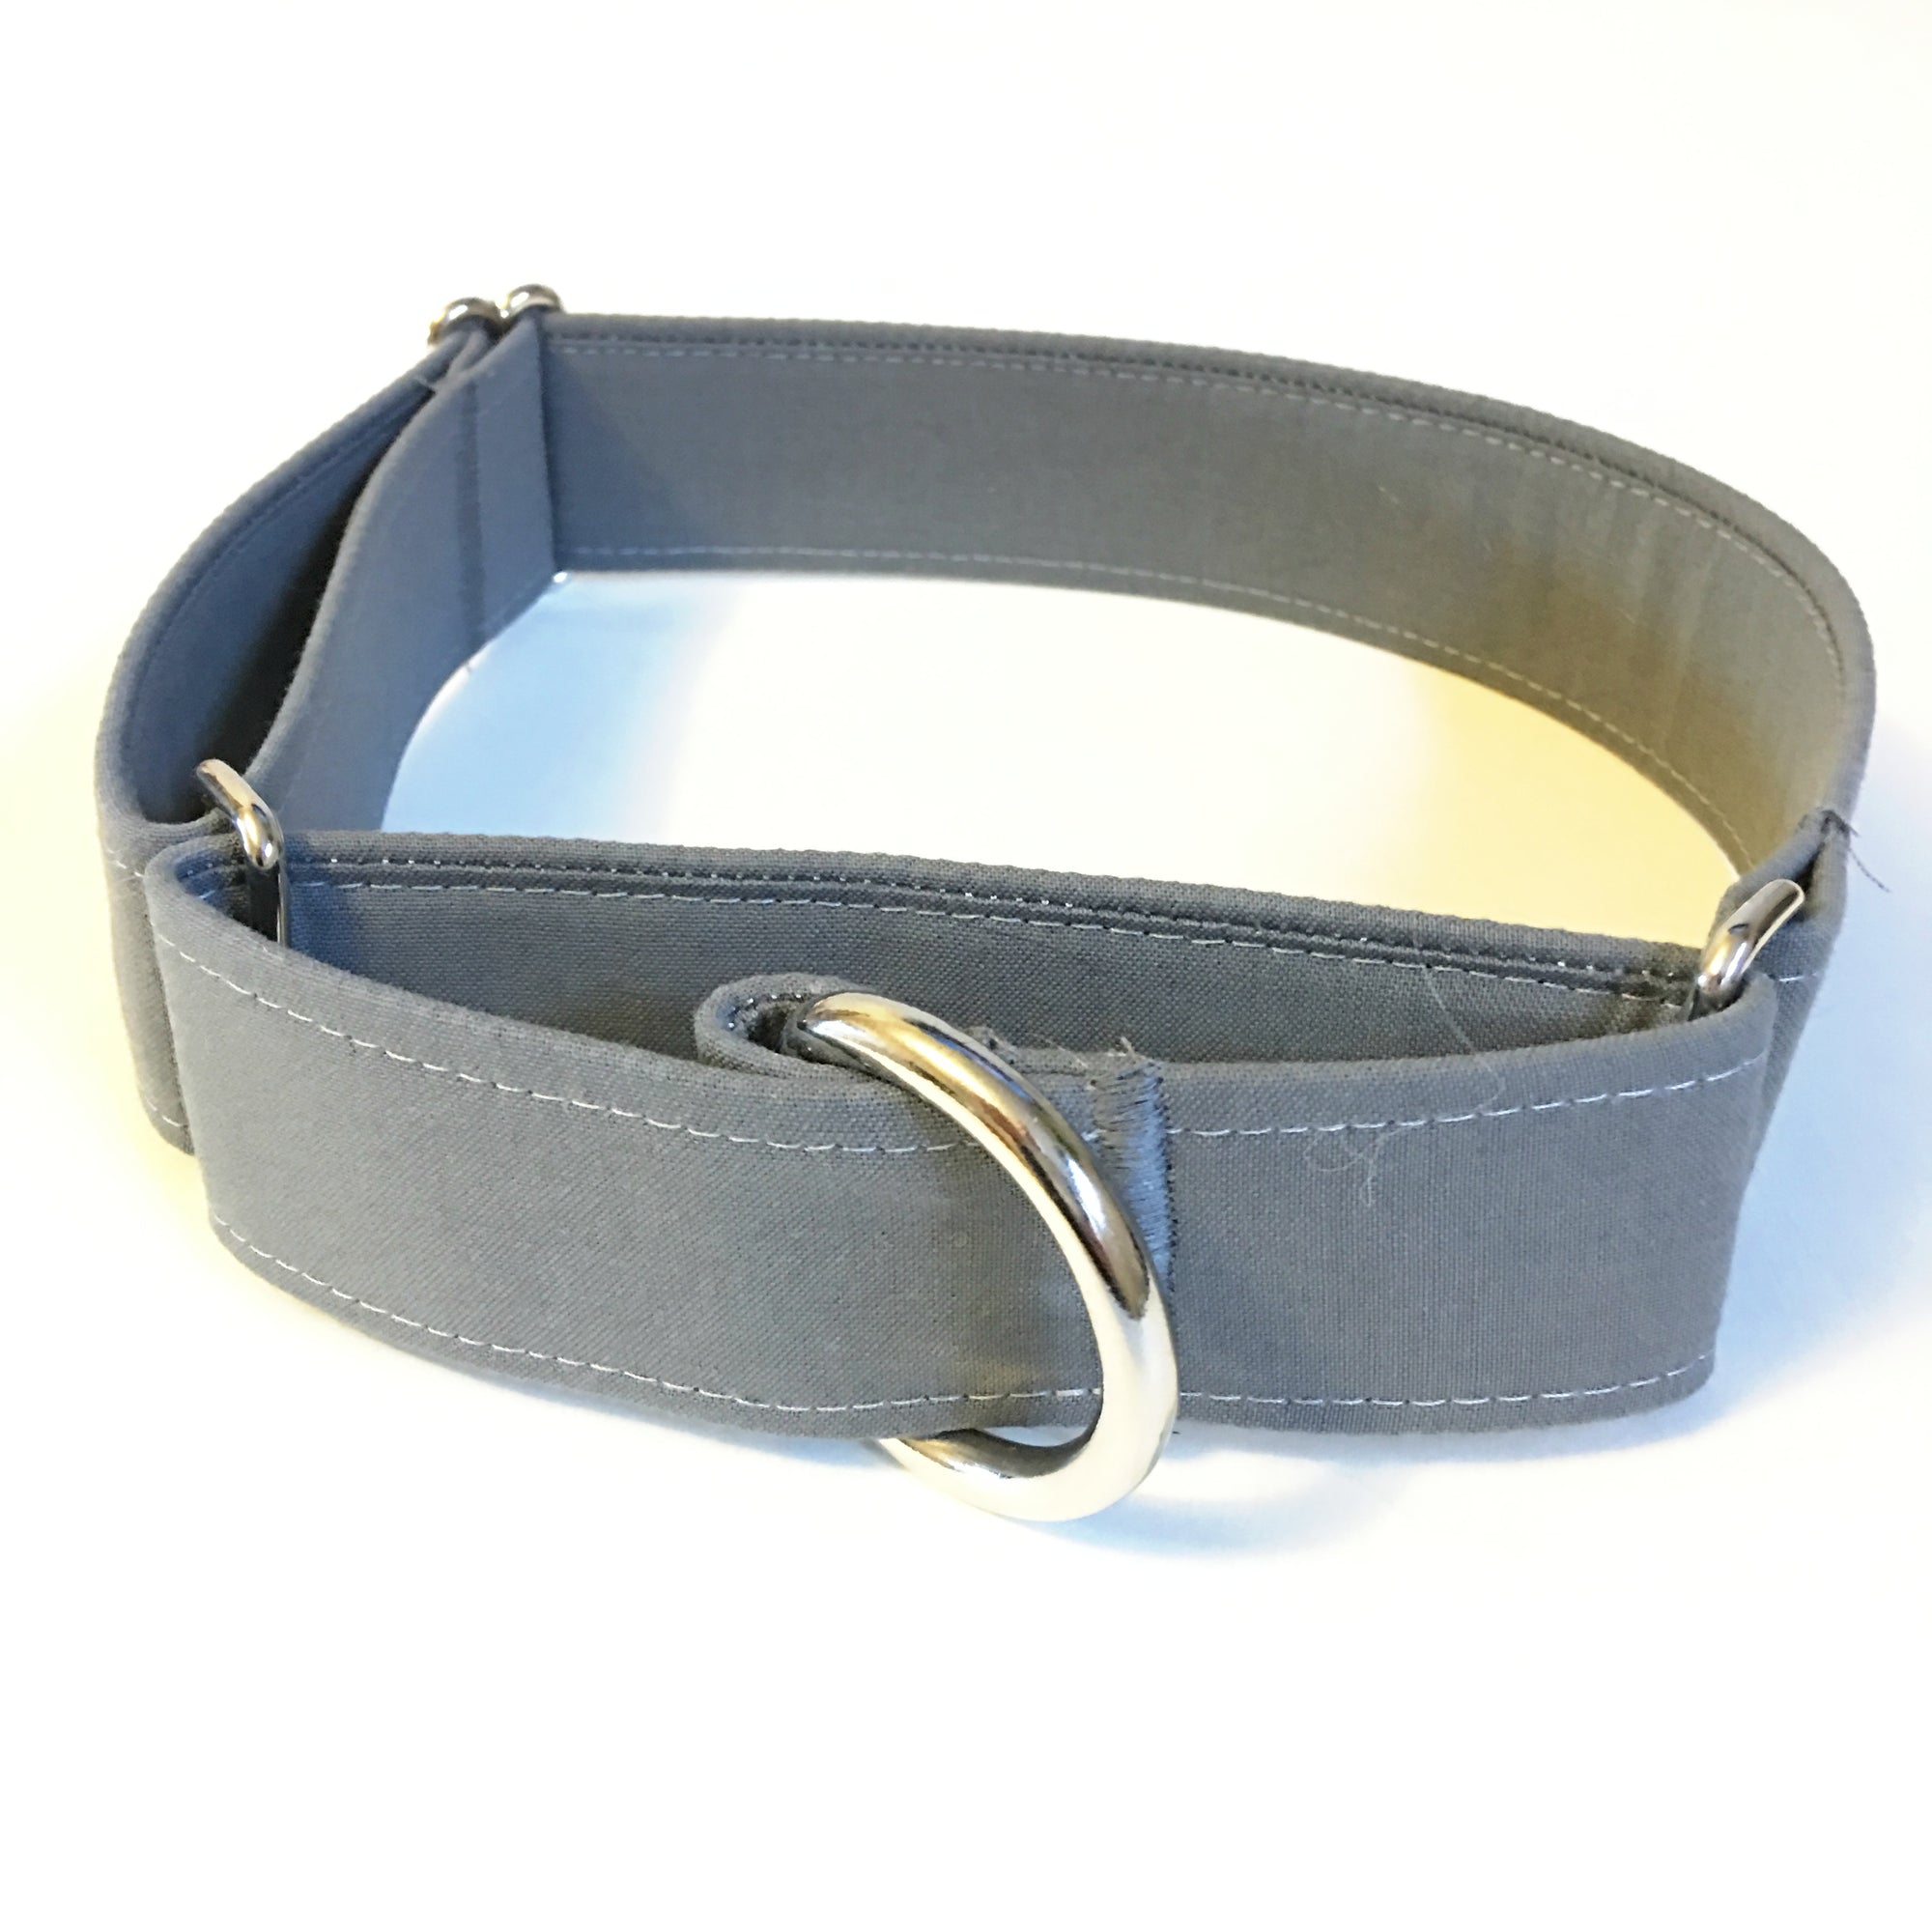 One Shade of Grey Martingale Collar - N.G. Collars